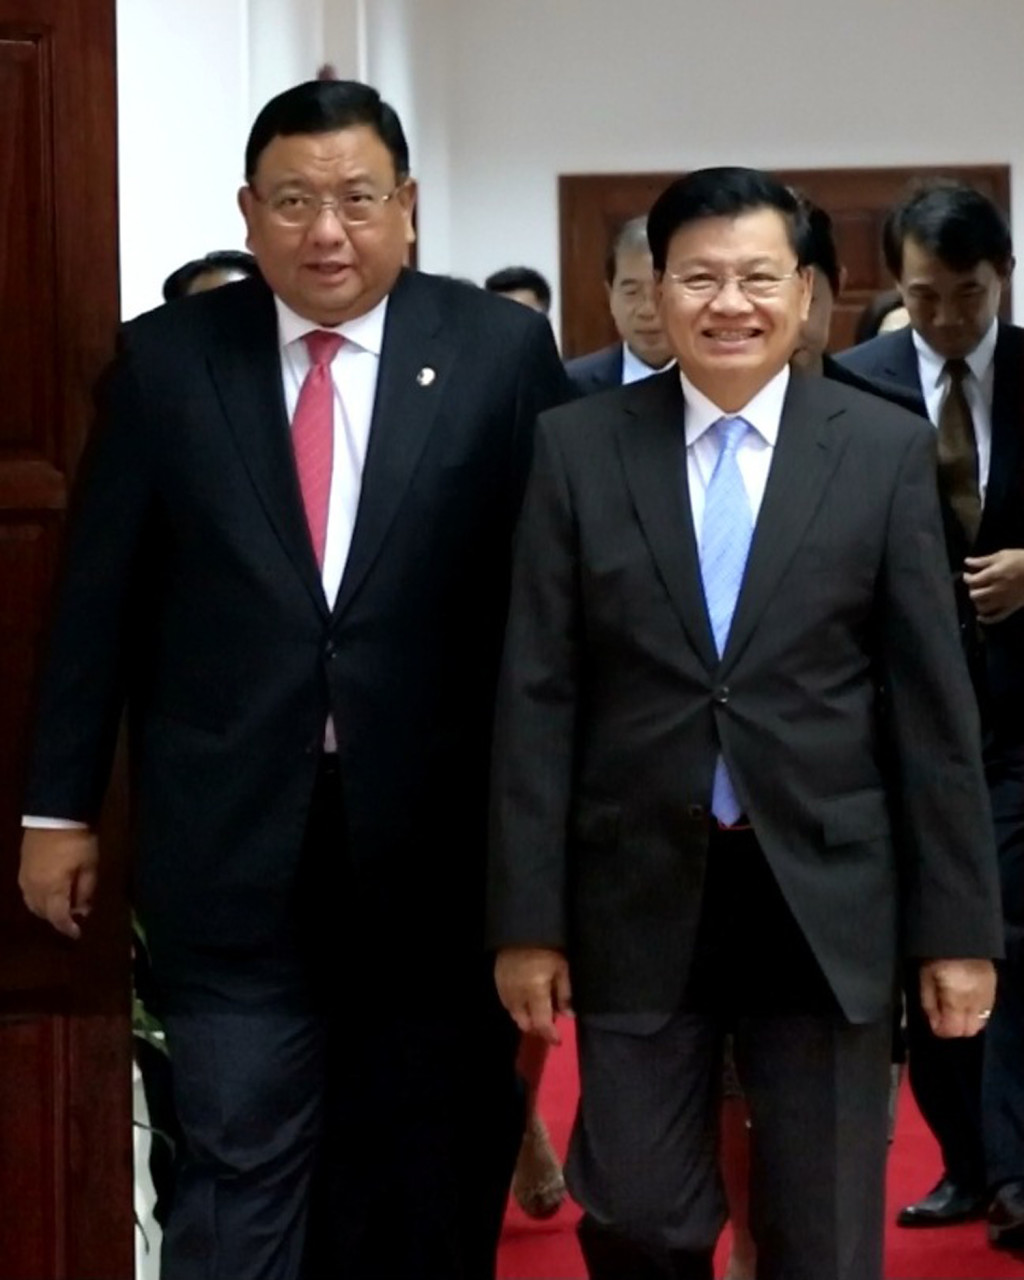 Laos Minister of Foreign Affairs Thongloun Sisoulith escorts Philippine Foreign Secretary Jose Rene Almendras to a meeting room for talks in Vientiane. VIENTIANE TIMES/ASIA NEWS NETWORK